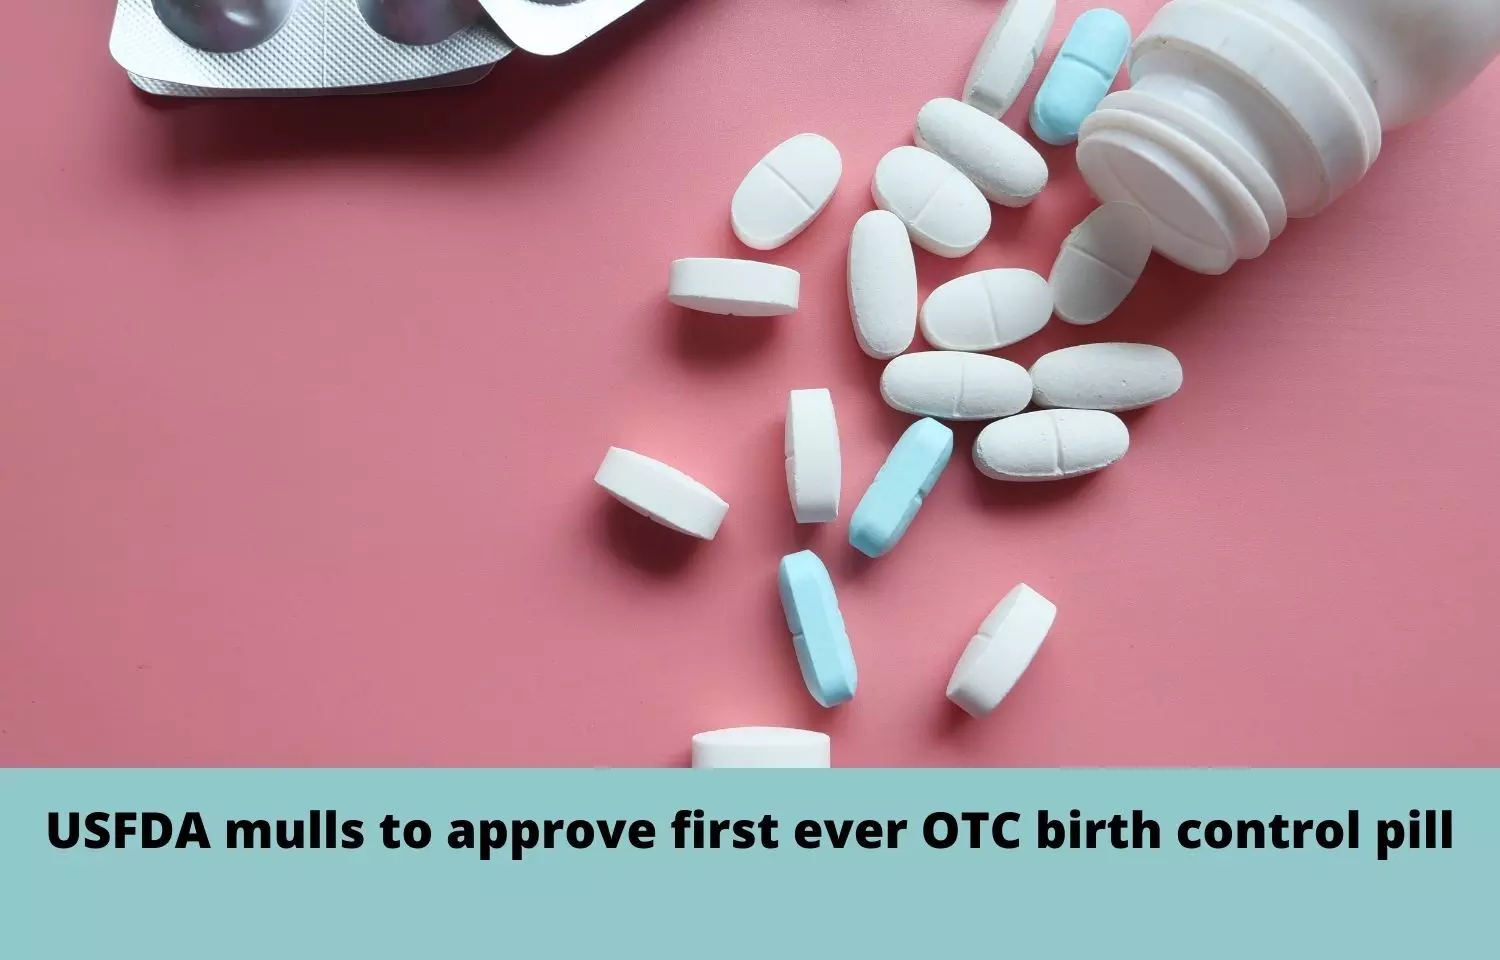 USFDA mulls to approve first ever OTC birth control pill